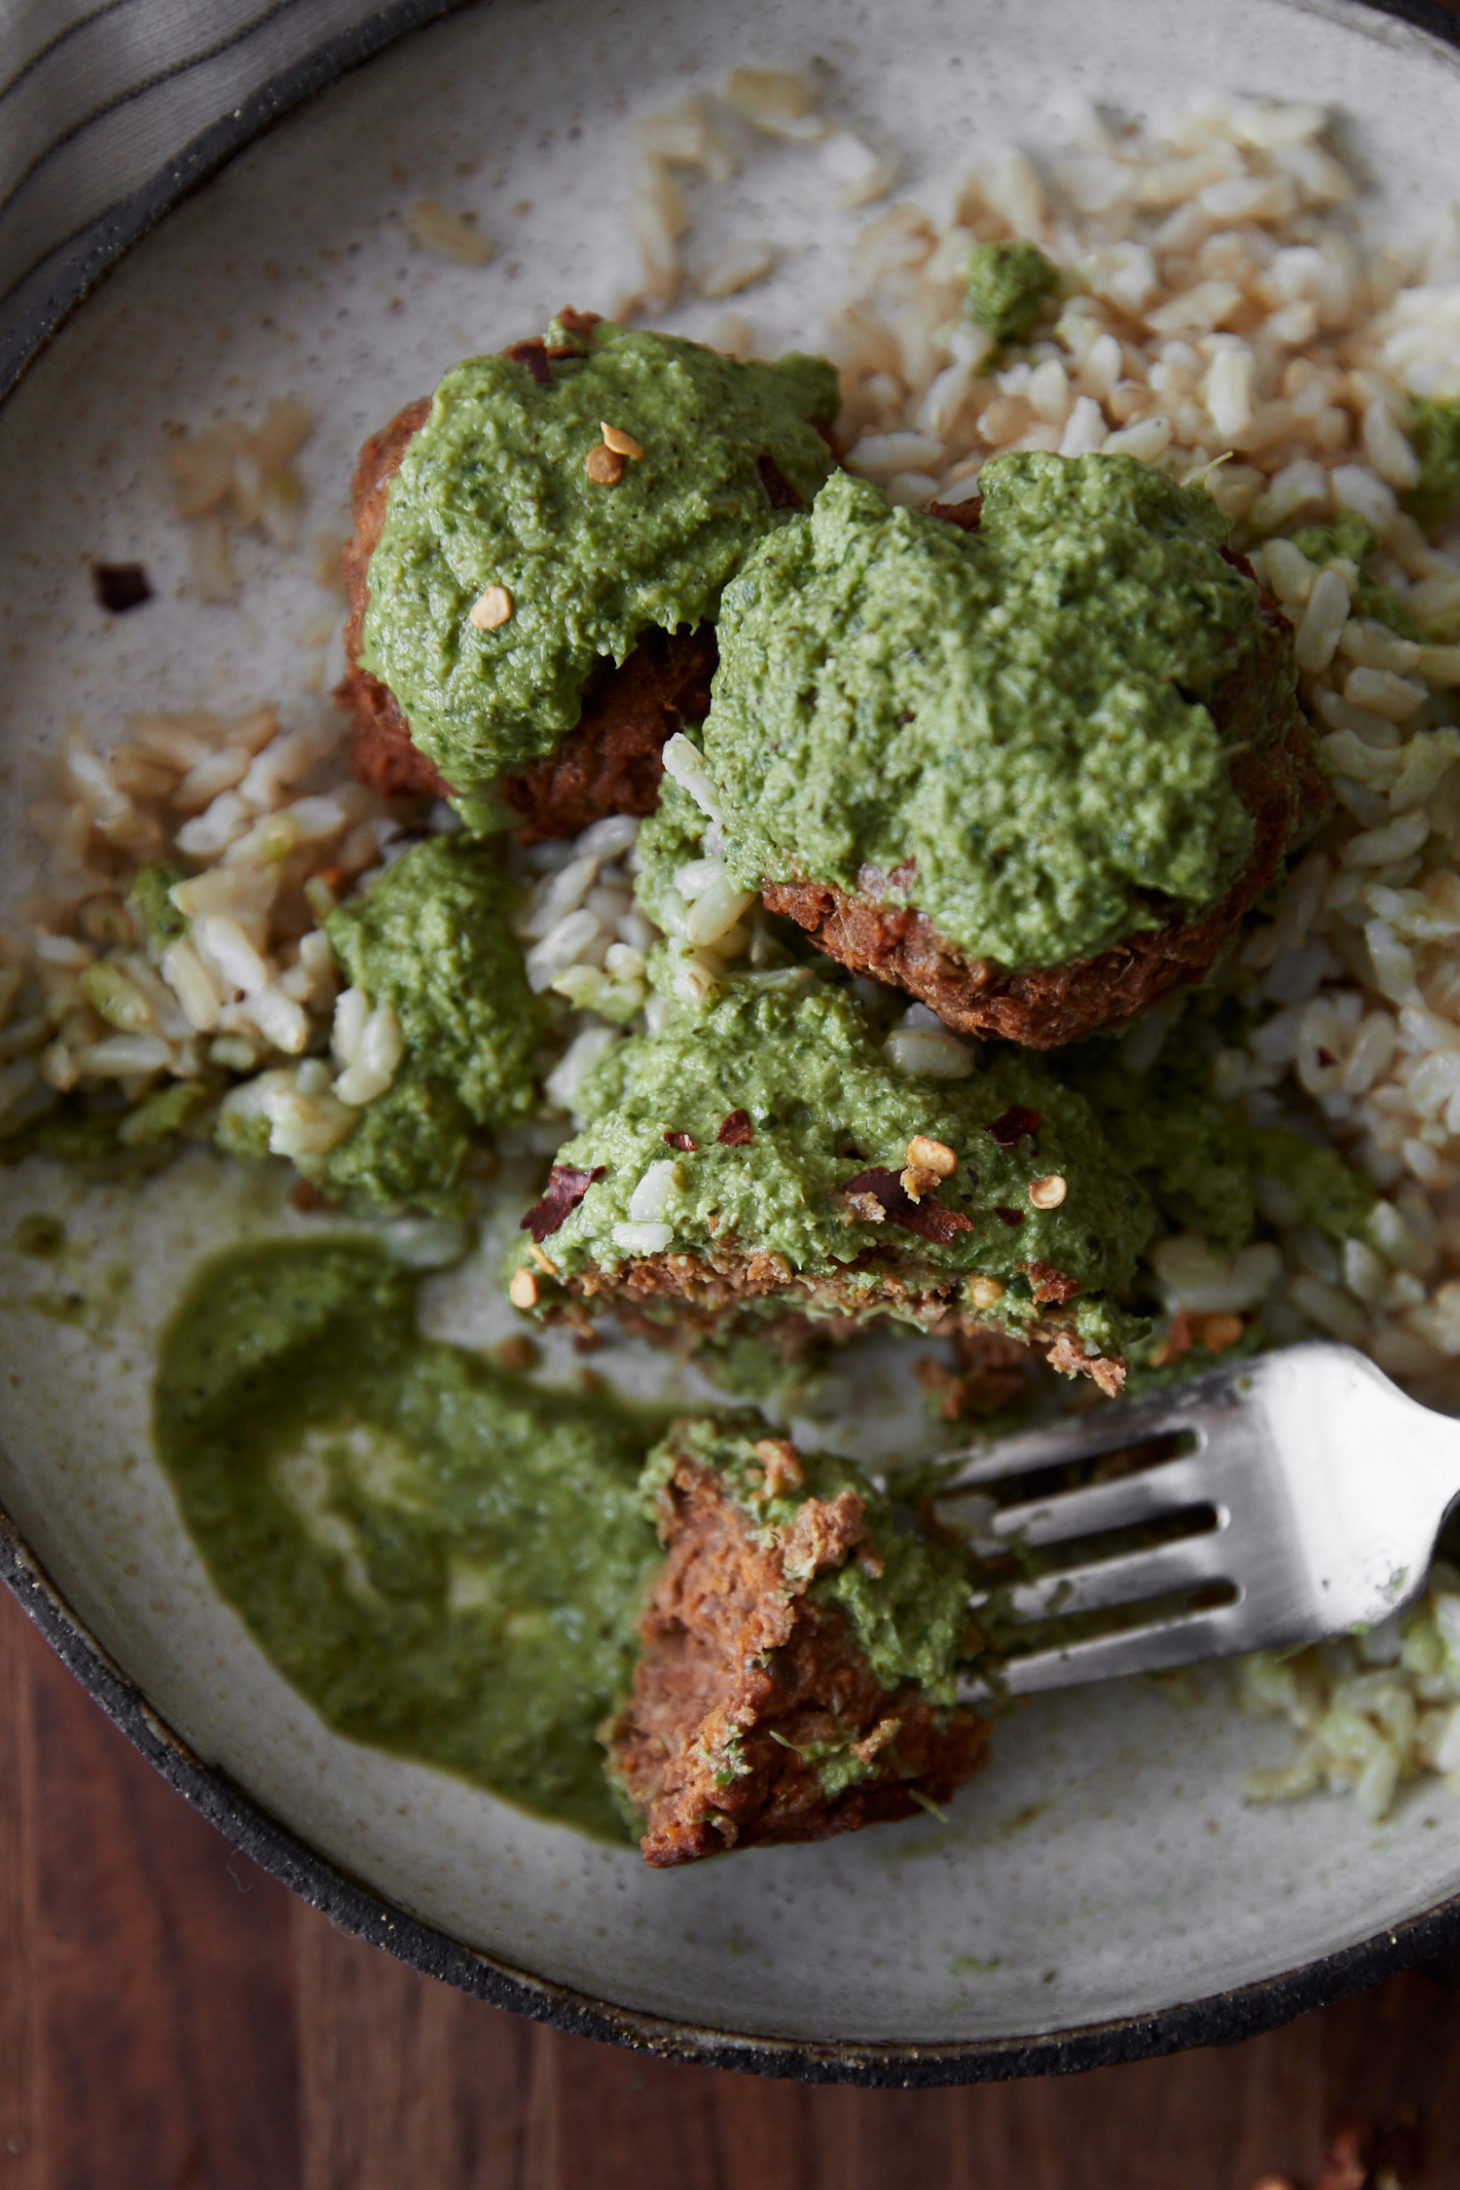 close-up of a cream bowl with green broccoli pesto with lentil bites and rice.